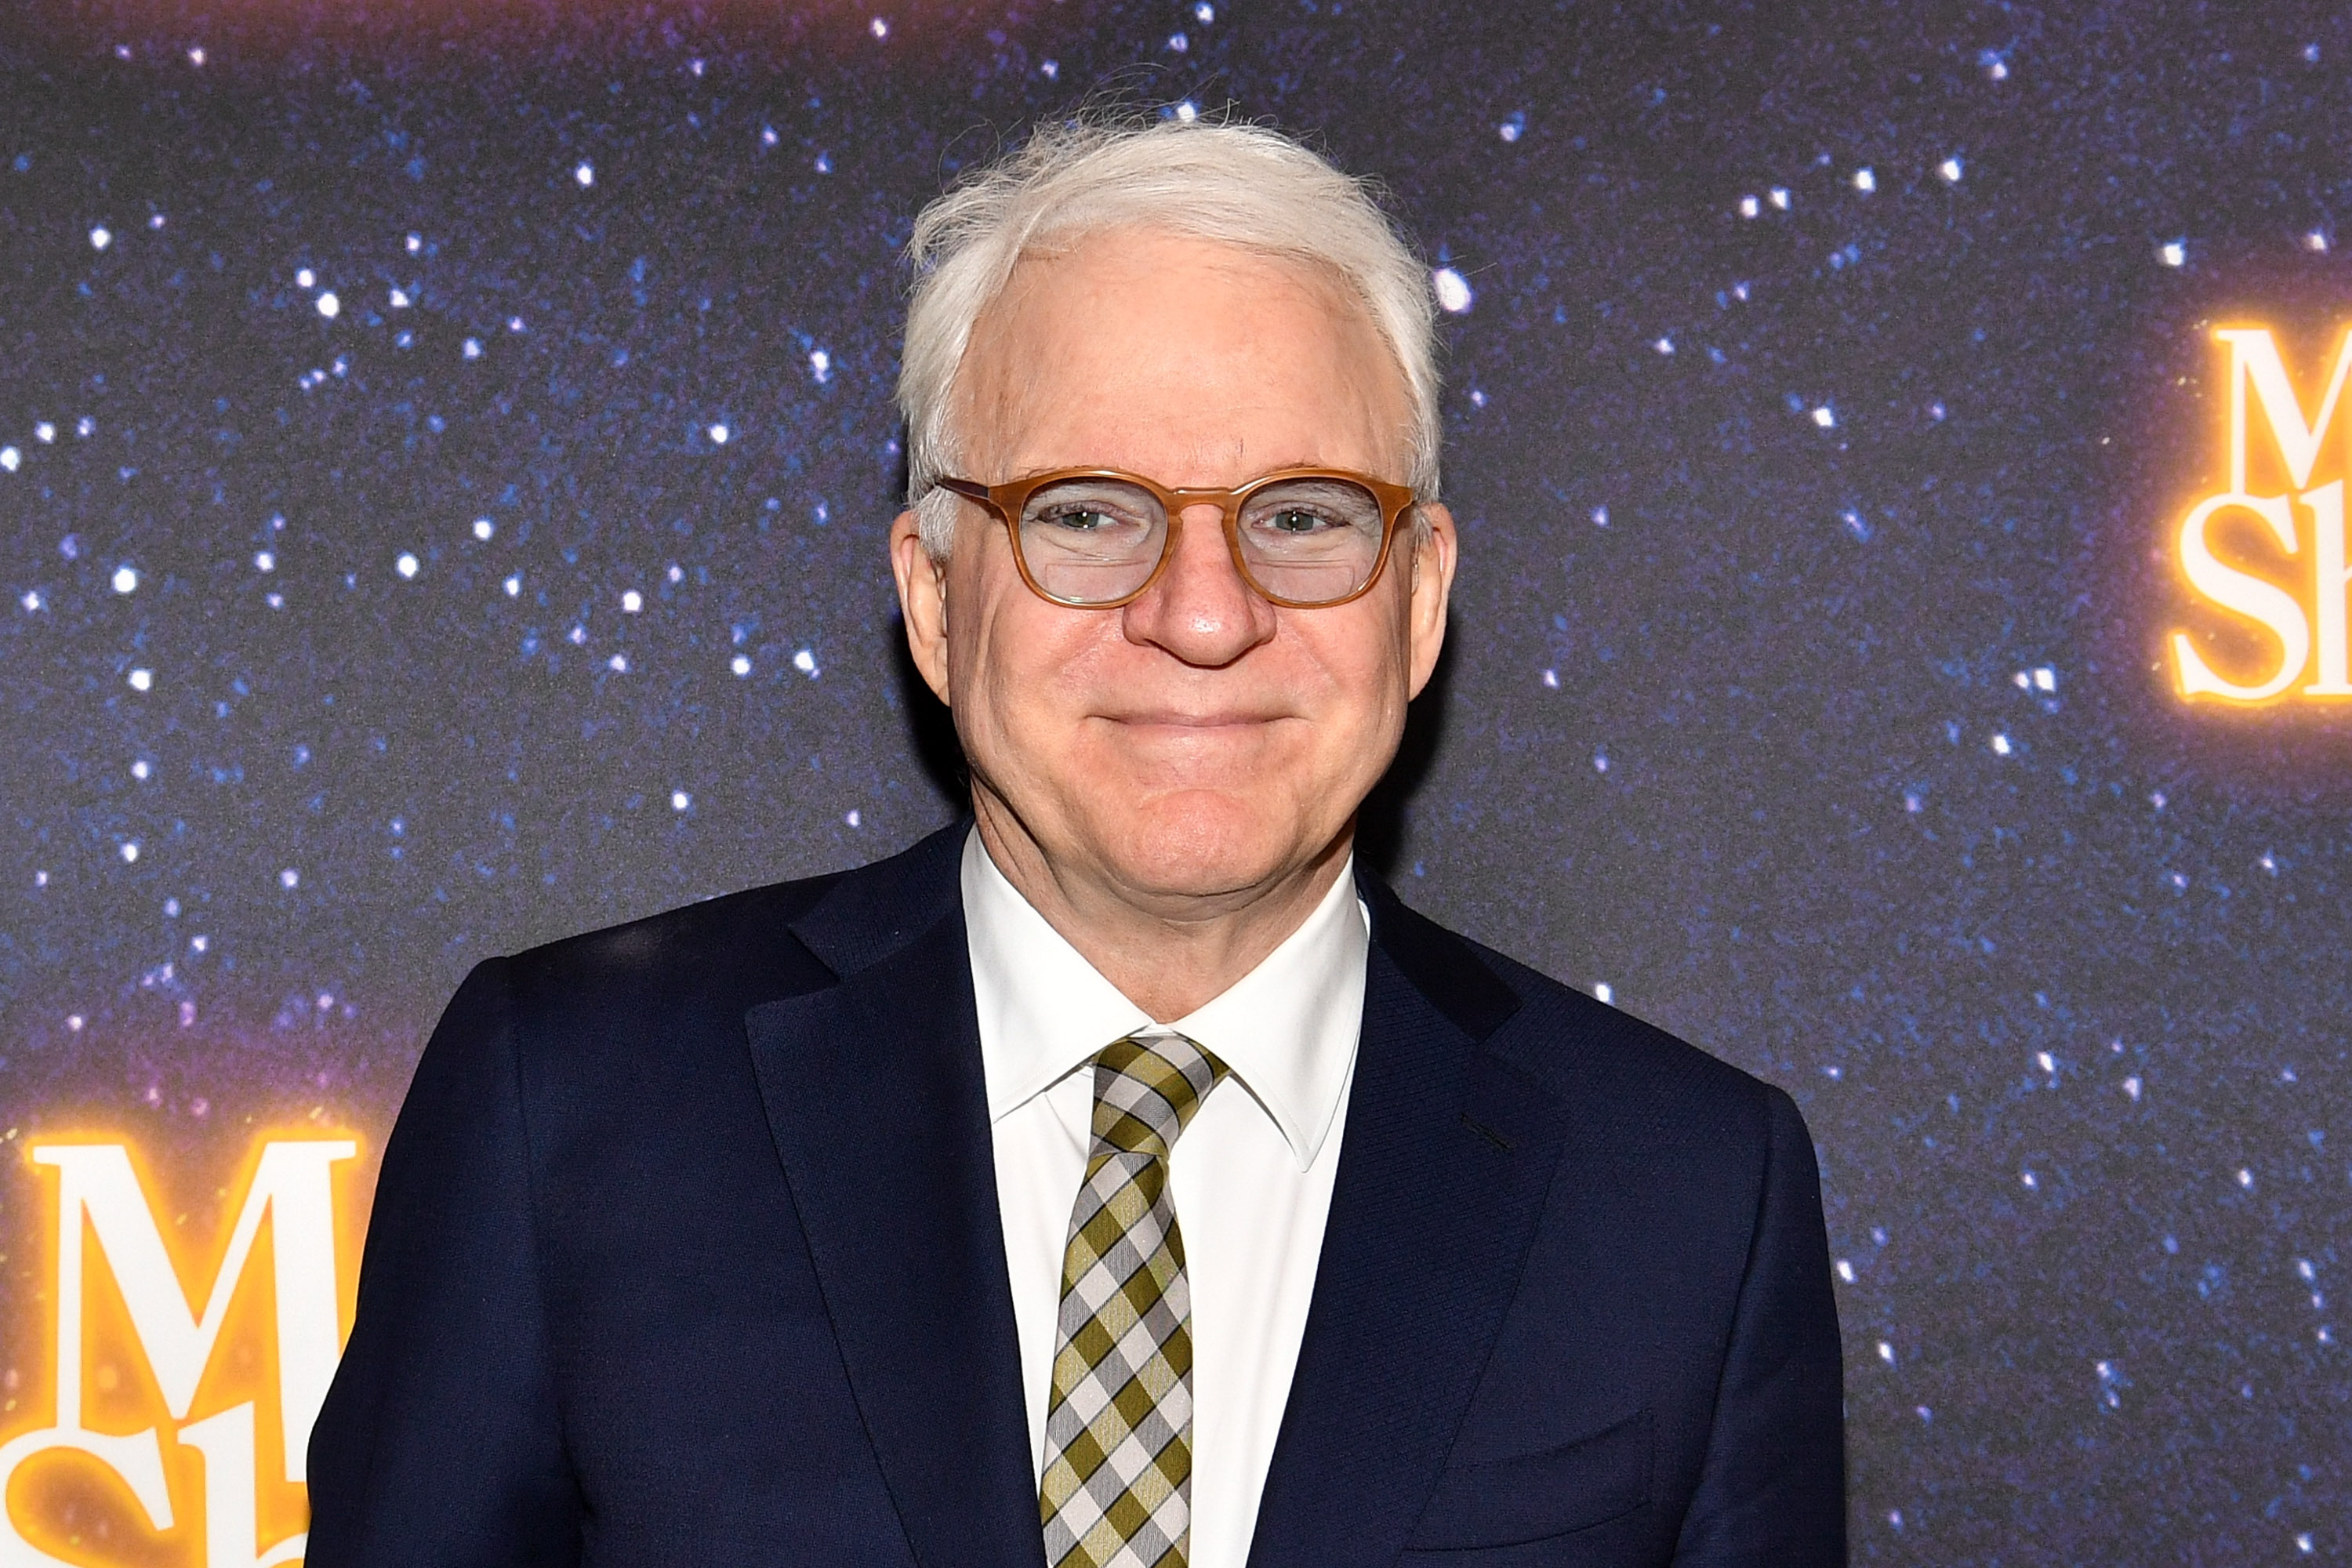 Steve Martin attends the "Meteor Shower" Broadway Opening Night at the Booth Theater on November 29, 2017, in New York City.  | Source: Getty Images